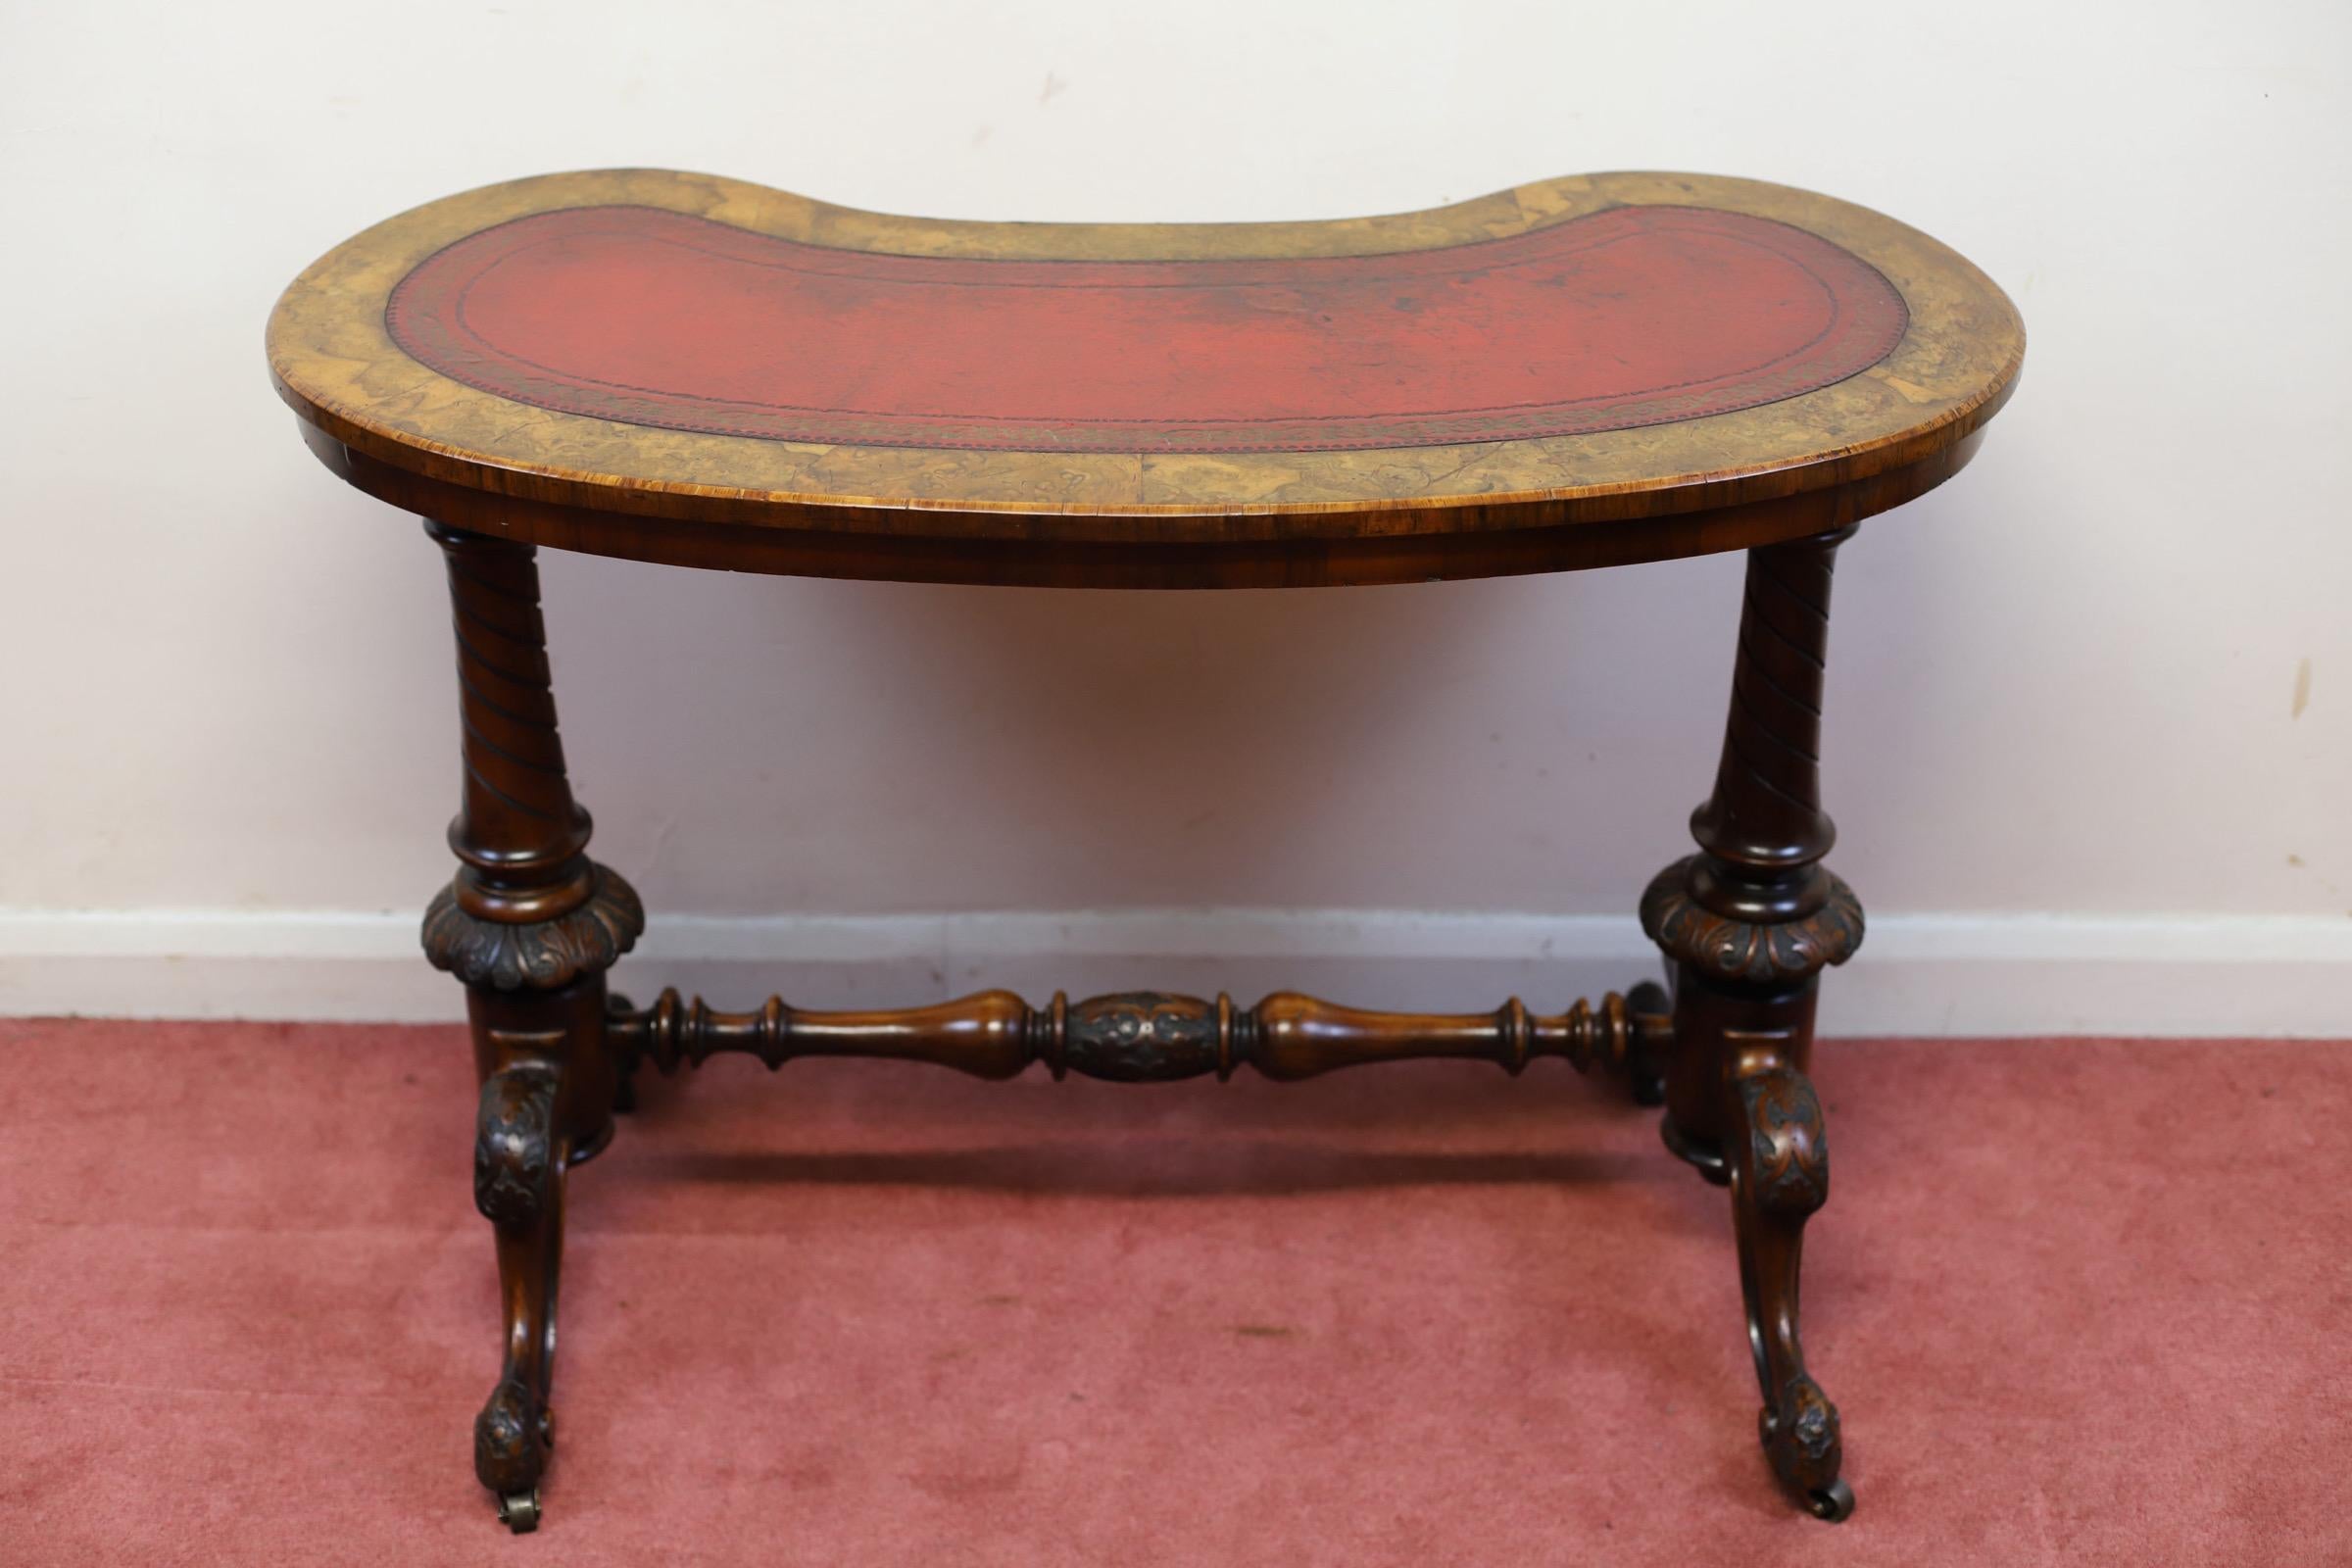 We delight to offer for sale this lovely mid-Victorian burr walnut kidney shaped stretcher table, the top inset with tooled red leather above a carved base , in amazing condition .
Don't hesitate to contact me if you have any questions.
Please have